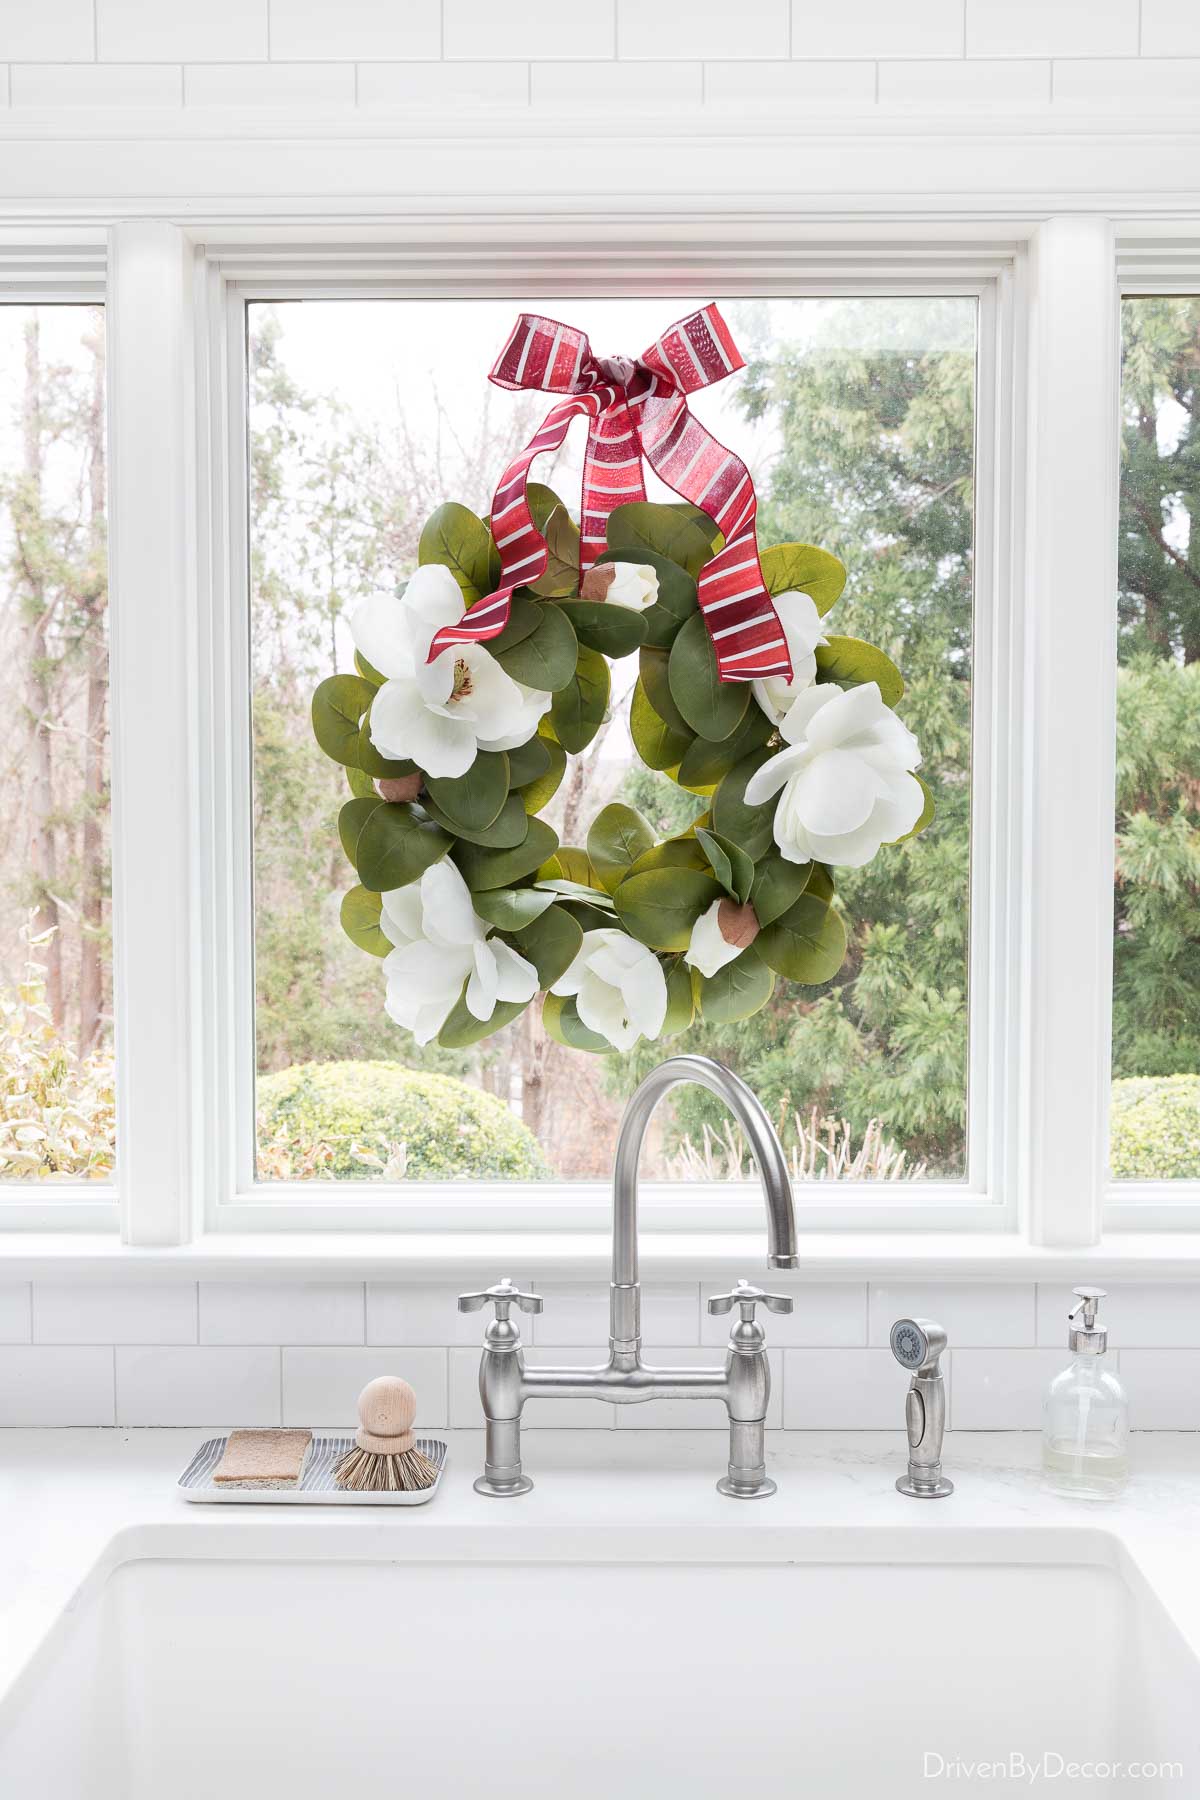 I love this simple wreath hung on a window over the kitchen sink